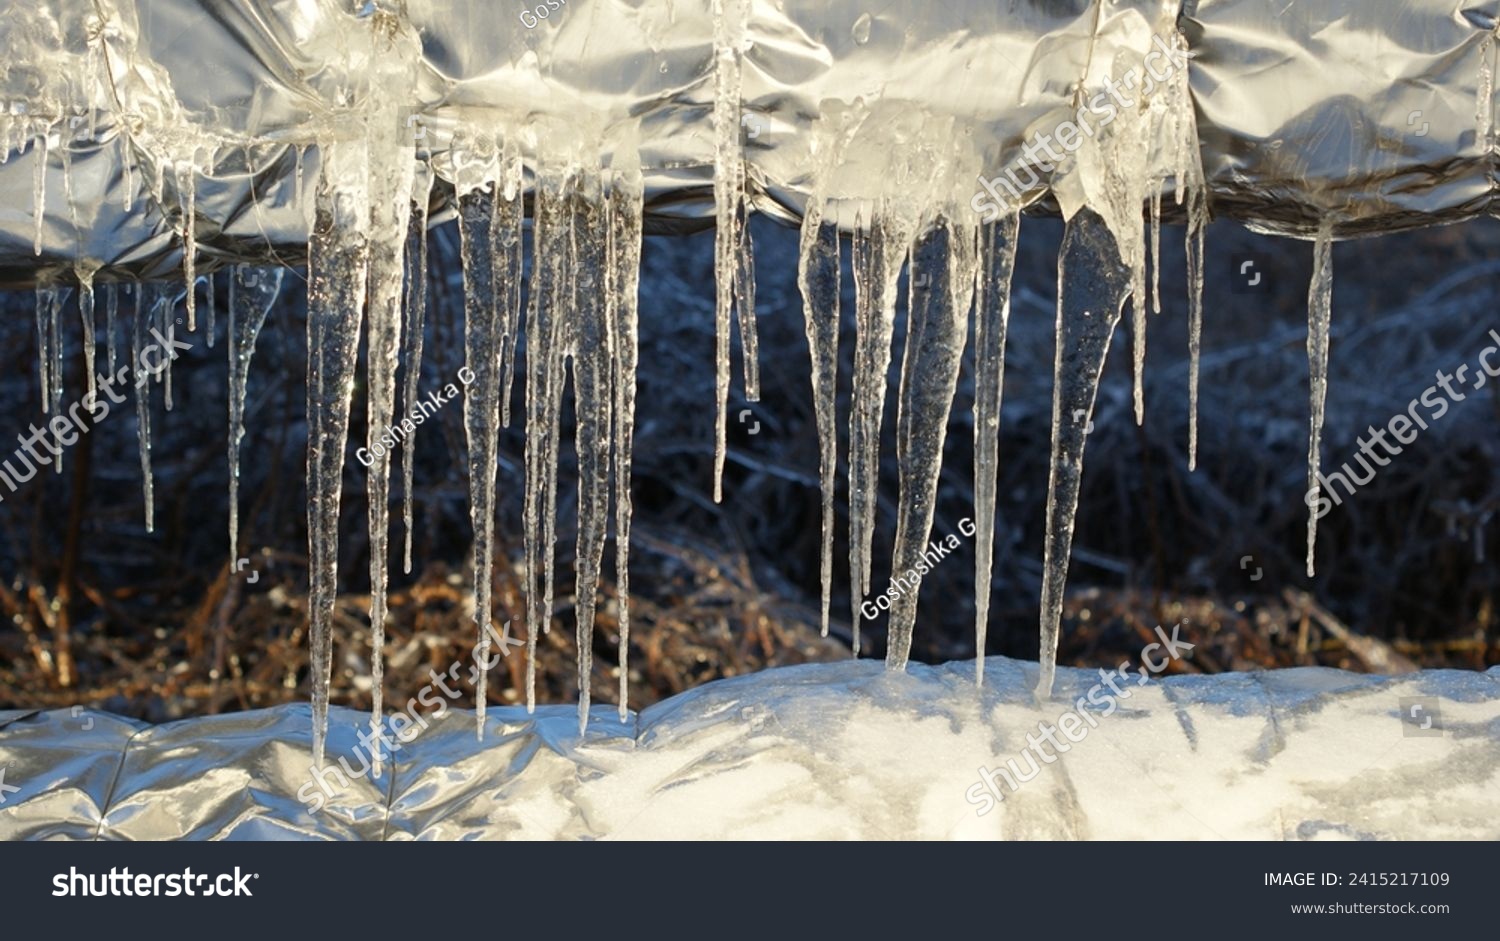 A close-up view of icicles hanging from a surface, glistening in the sunlight Below the icicles, snow is accumulated, reflecting the chilly atmosphere. #2415217109